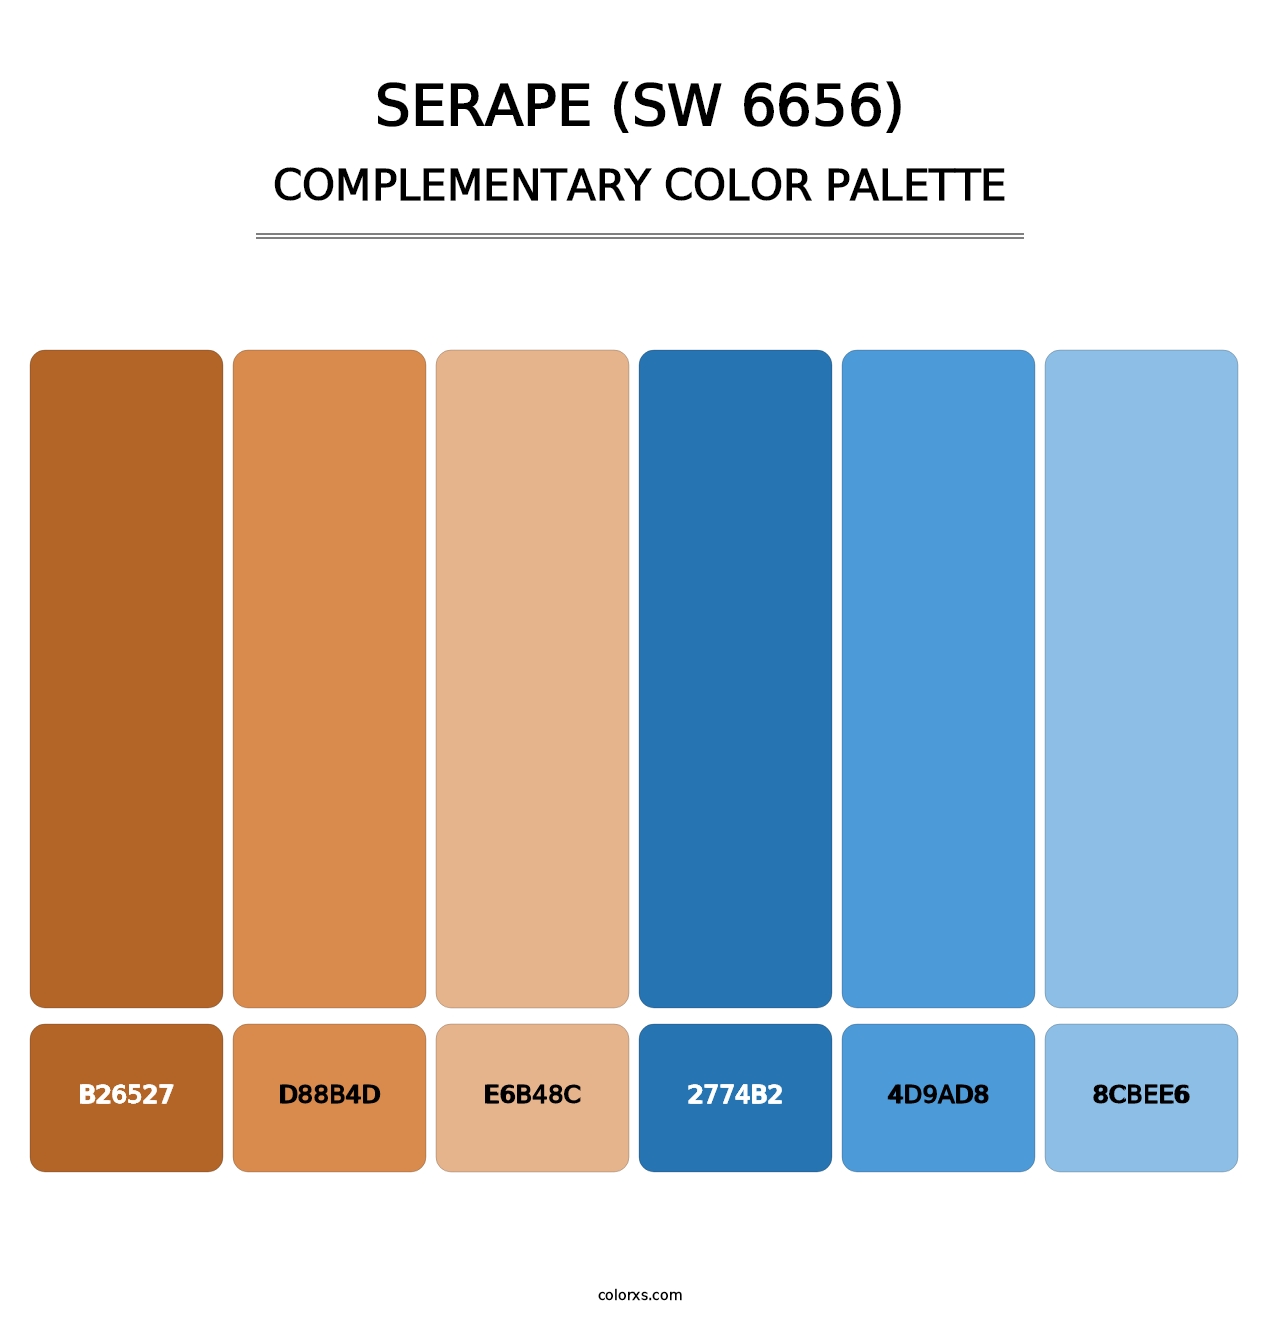 Serape (SW 6656) - Complementary Color Palette